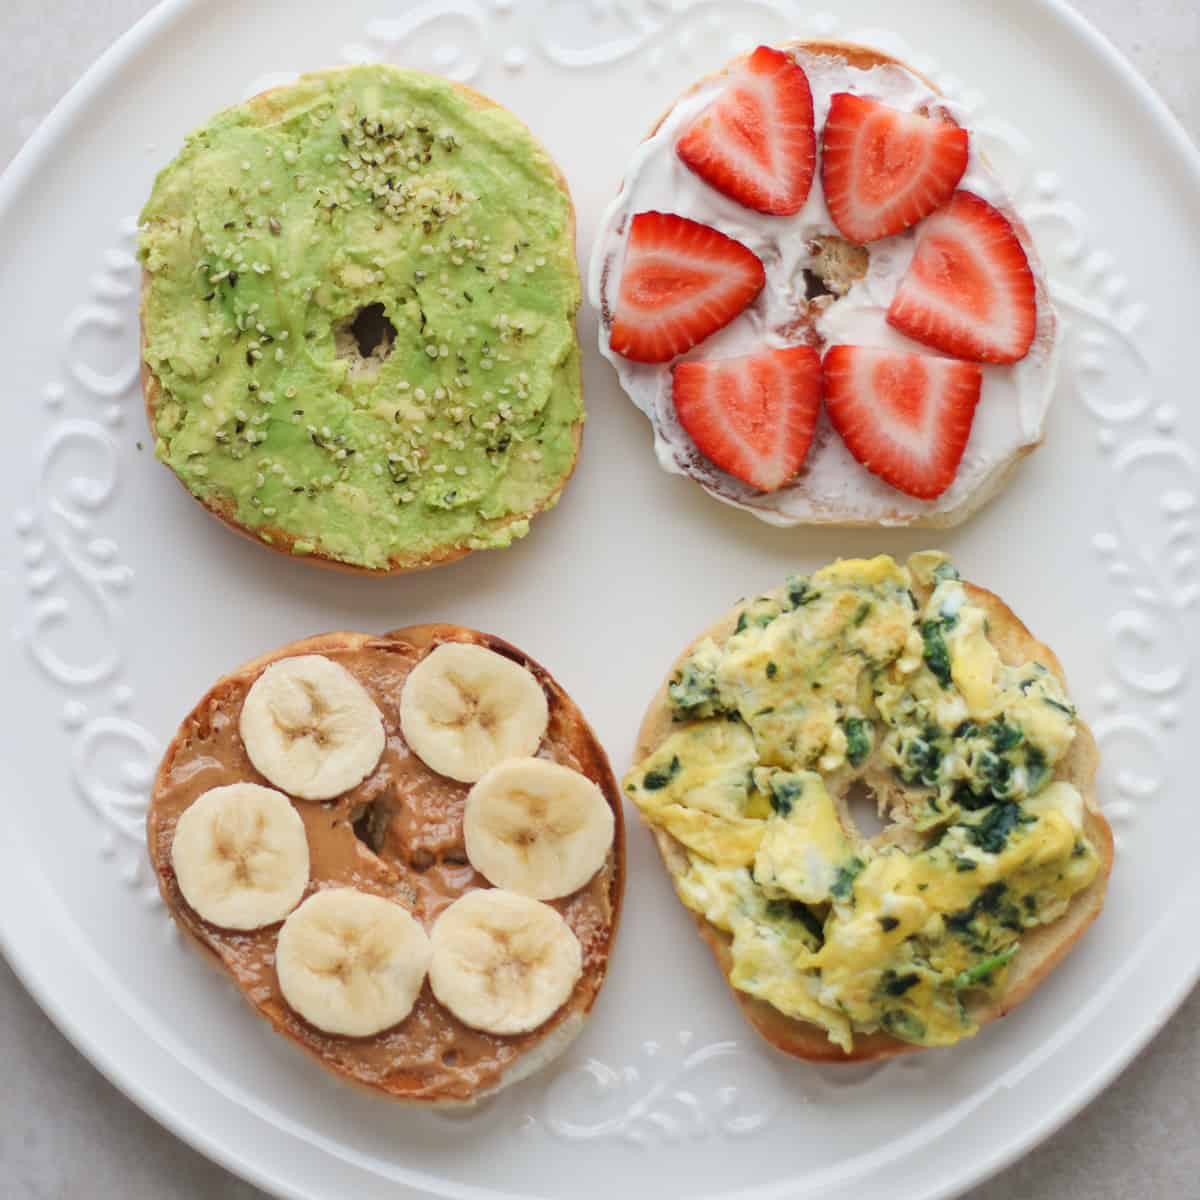 Four bagels with different toppings - avocado, peanut butter with banana, scrambled eggs, yogurt and strawberries.